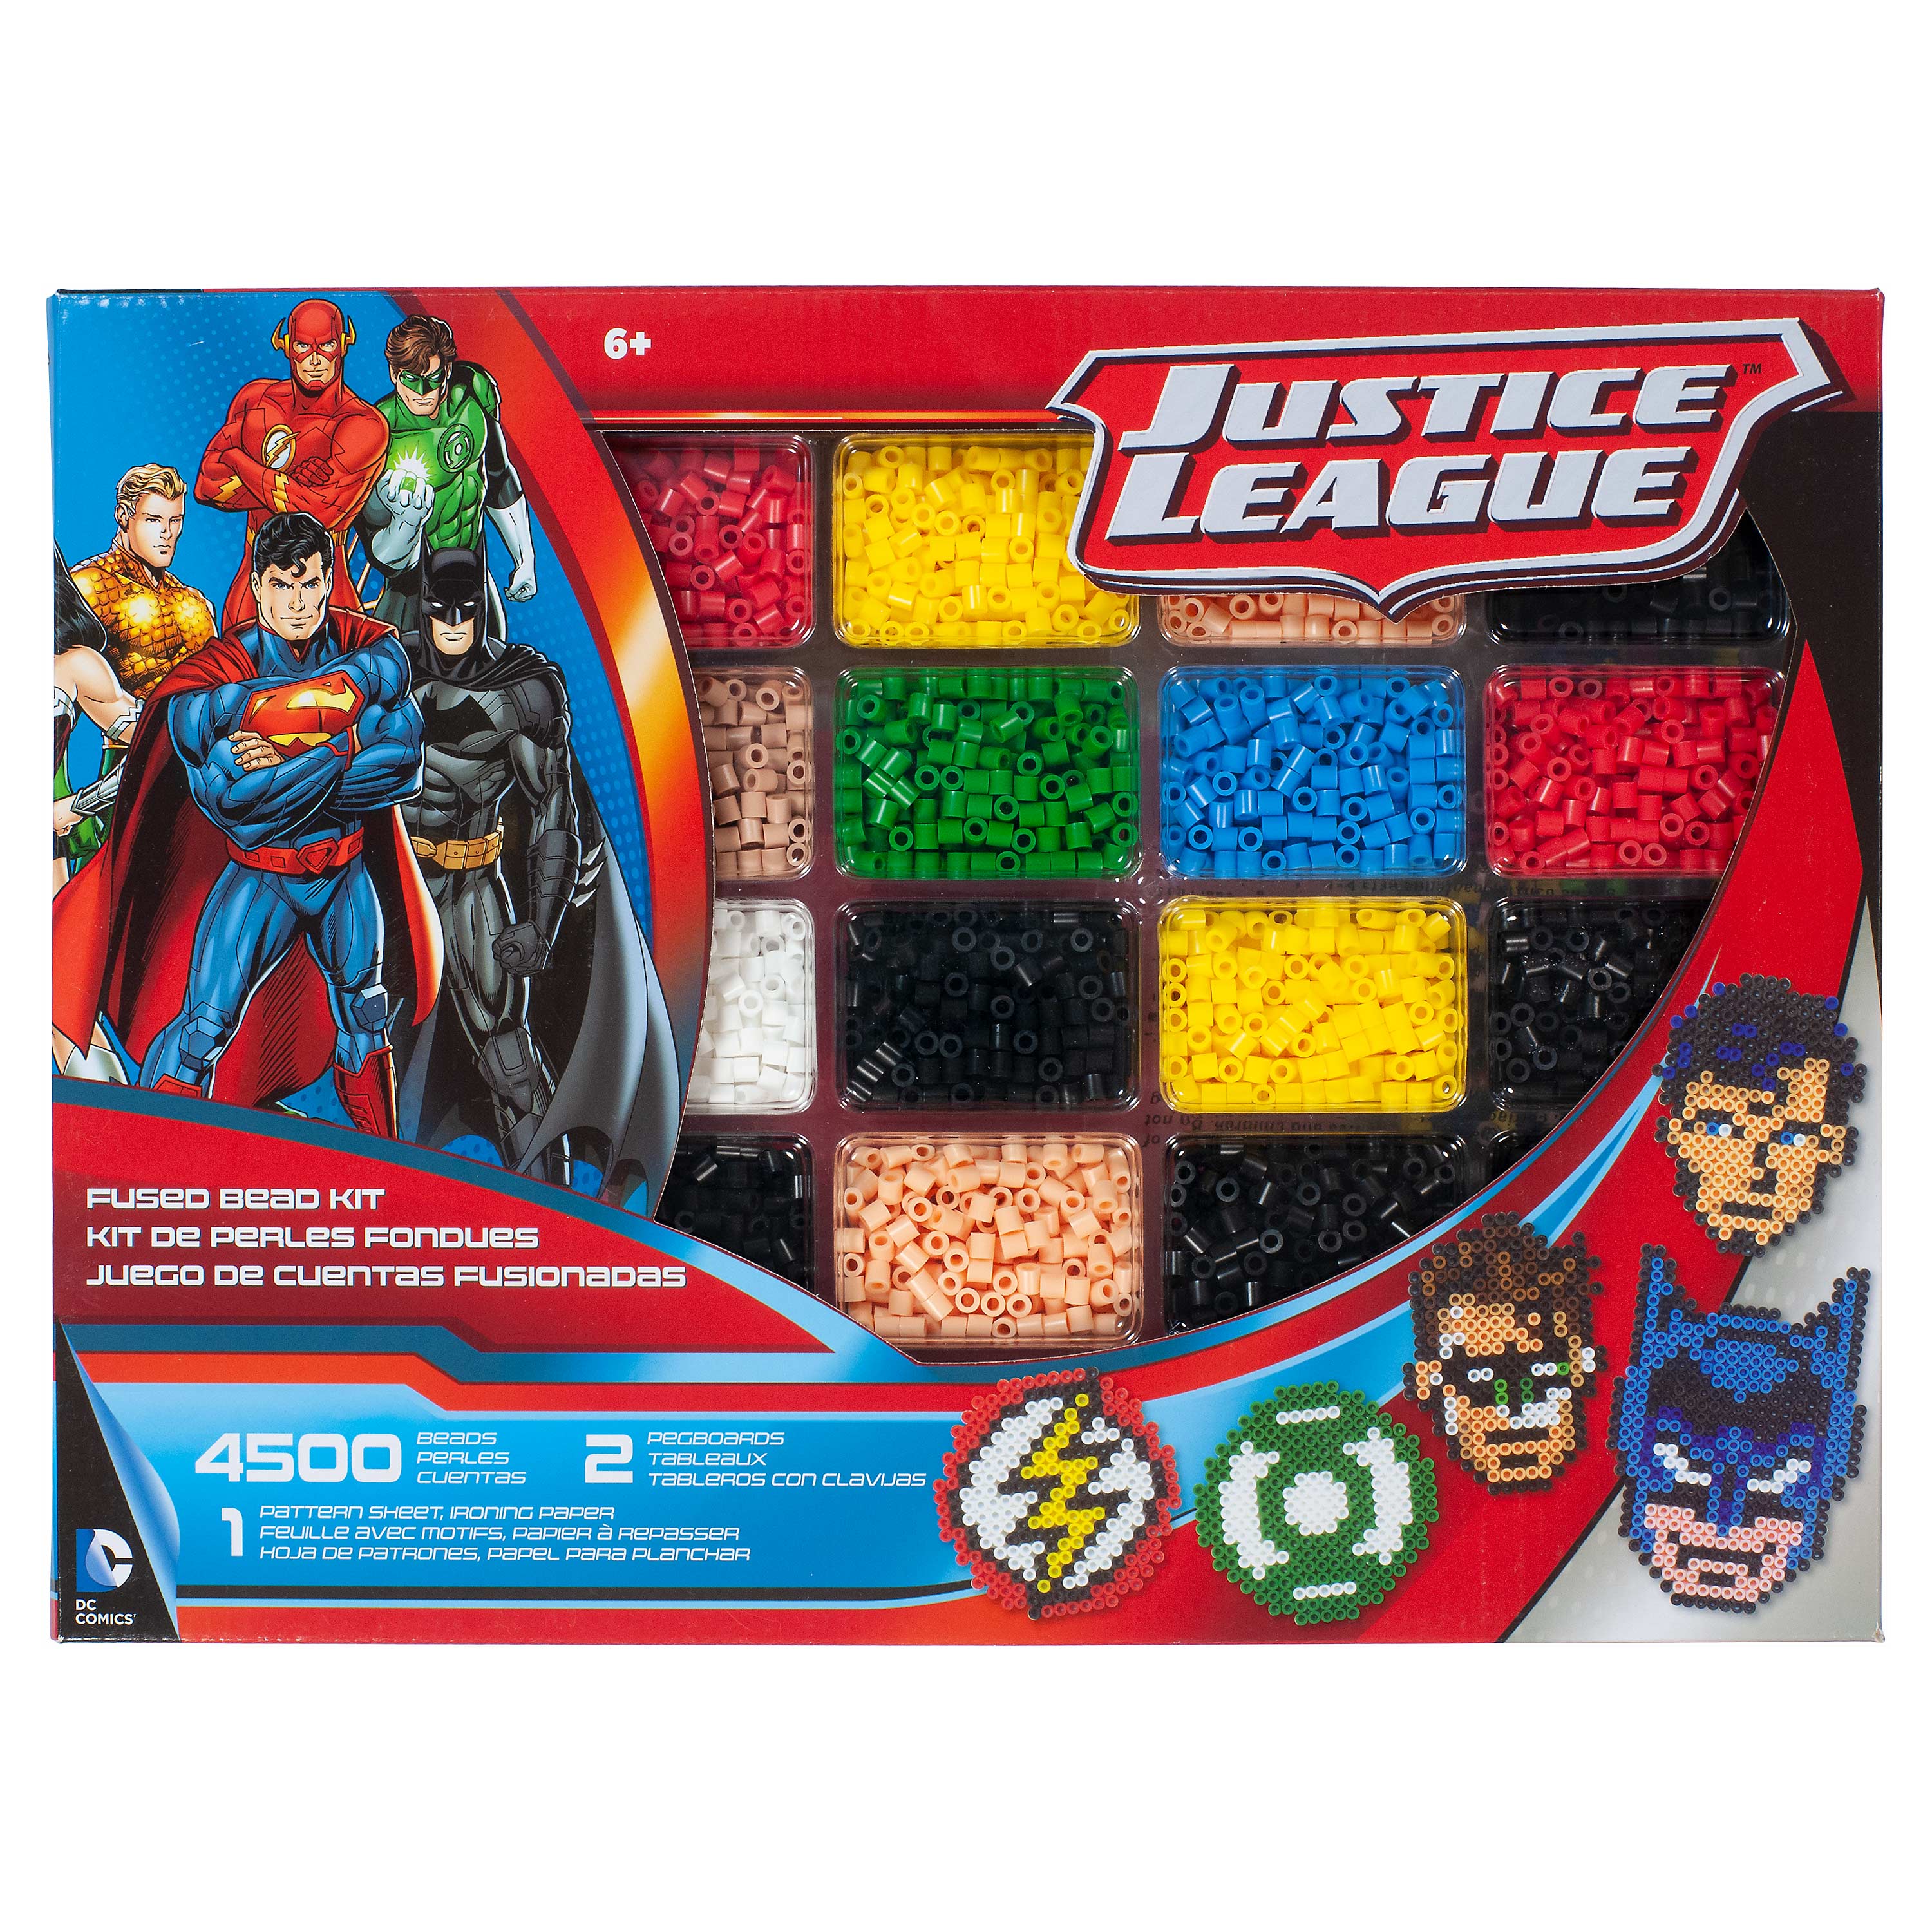 Perler Fused Bead Kit Deluxe Box Justice League, Ages 6 & up - image 1 of 4